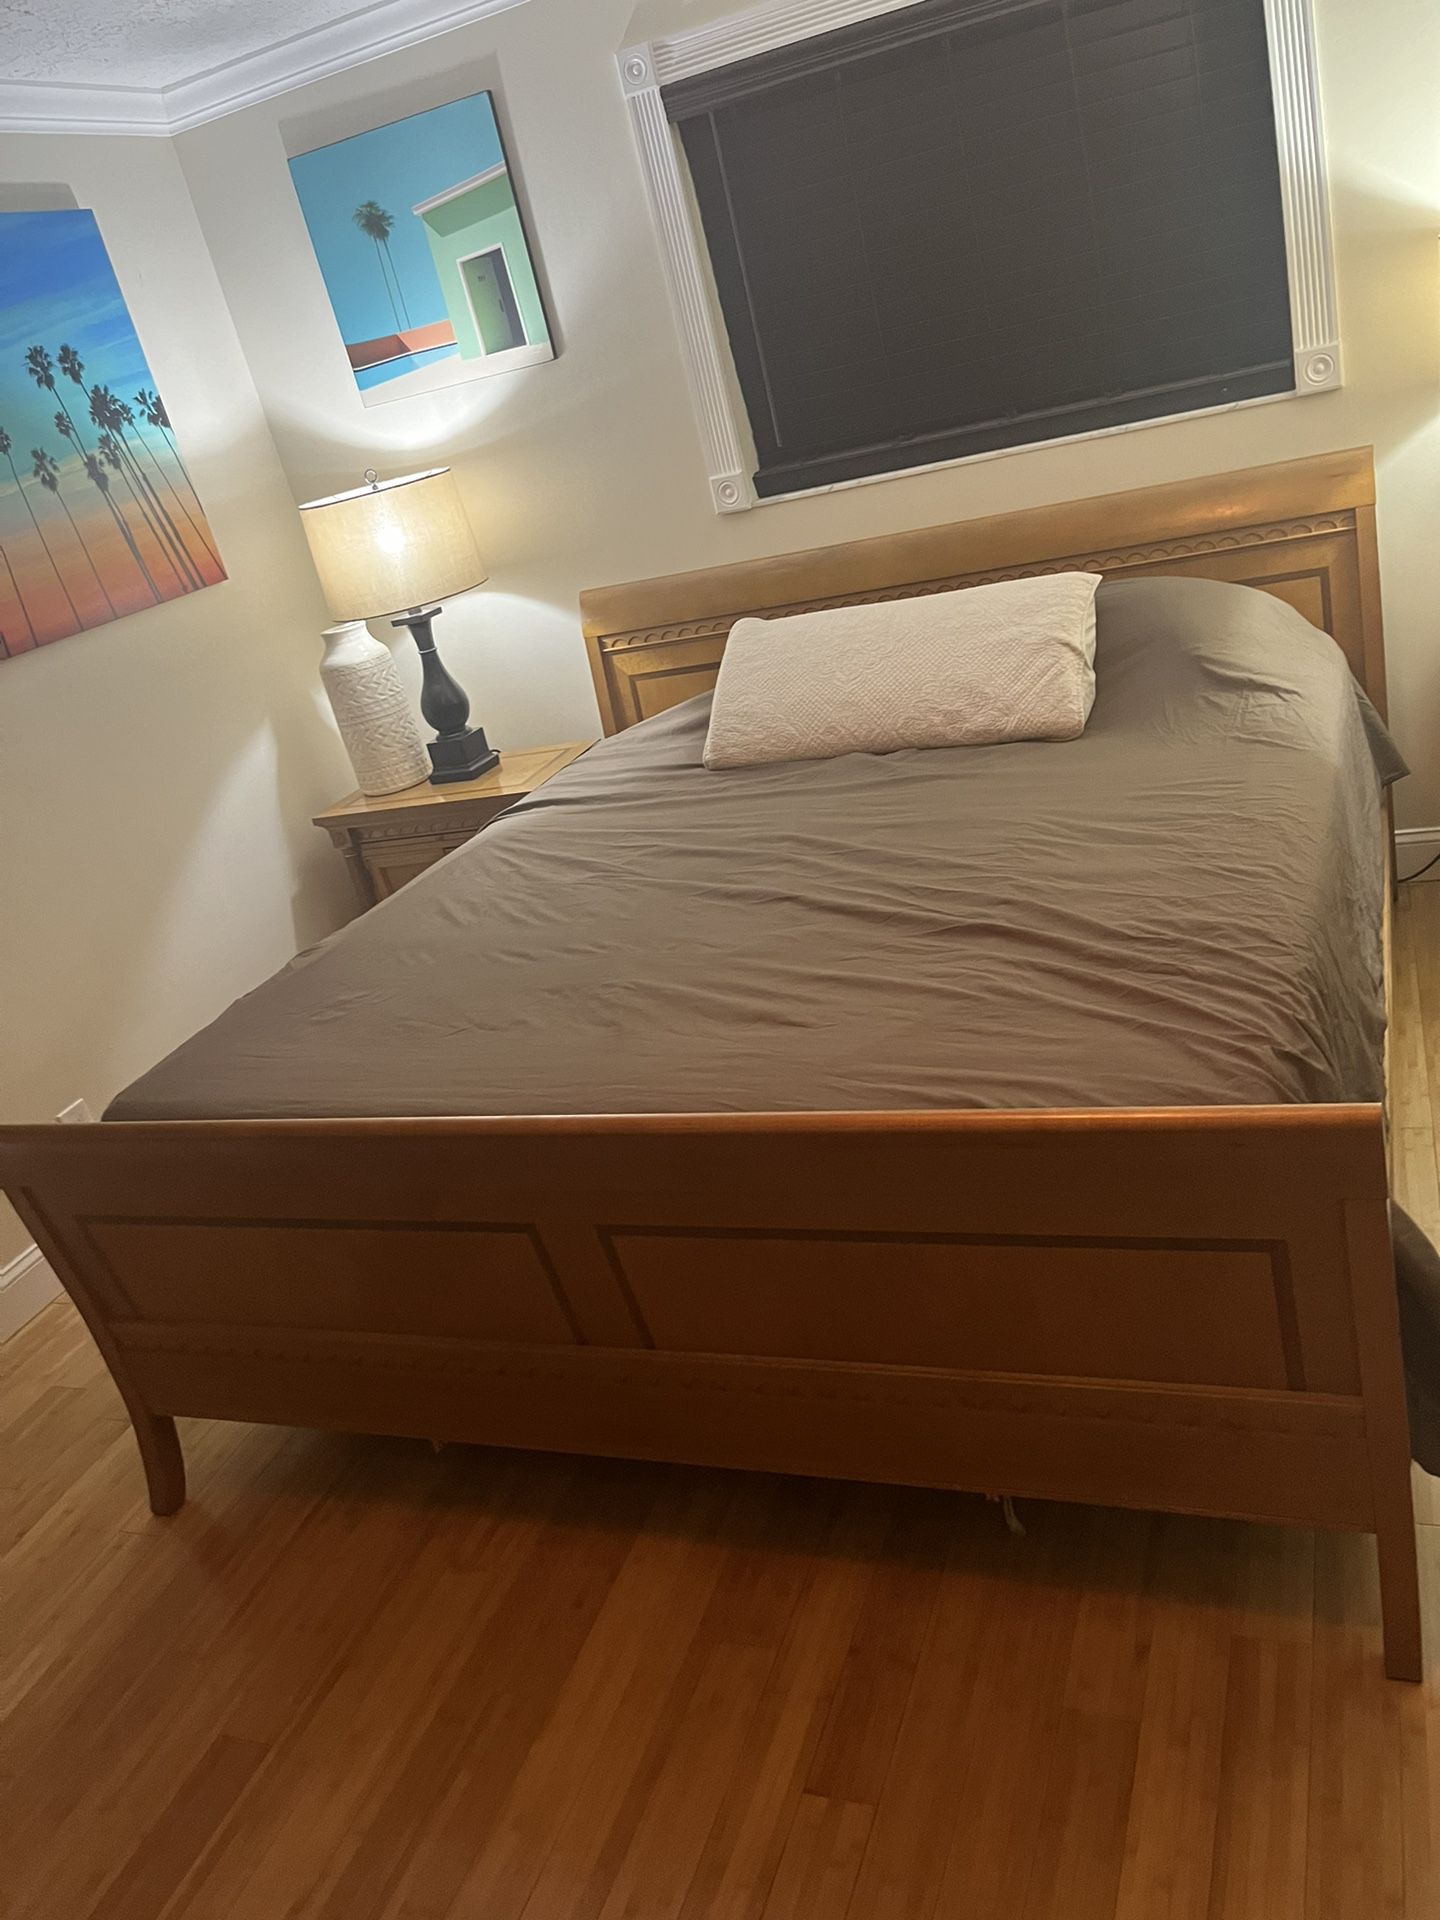 King Size Bedroom Set and Mattress 